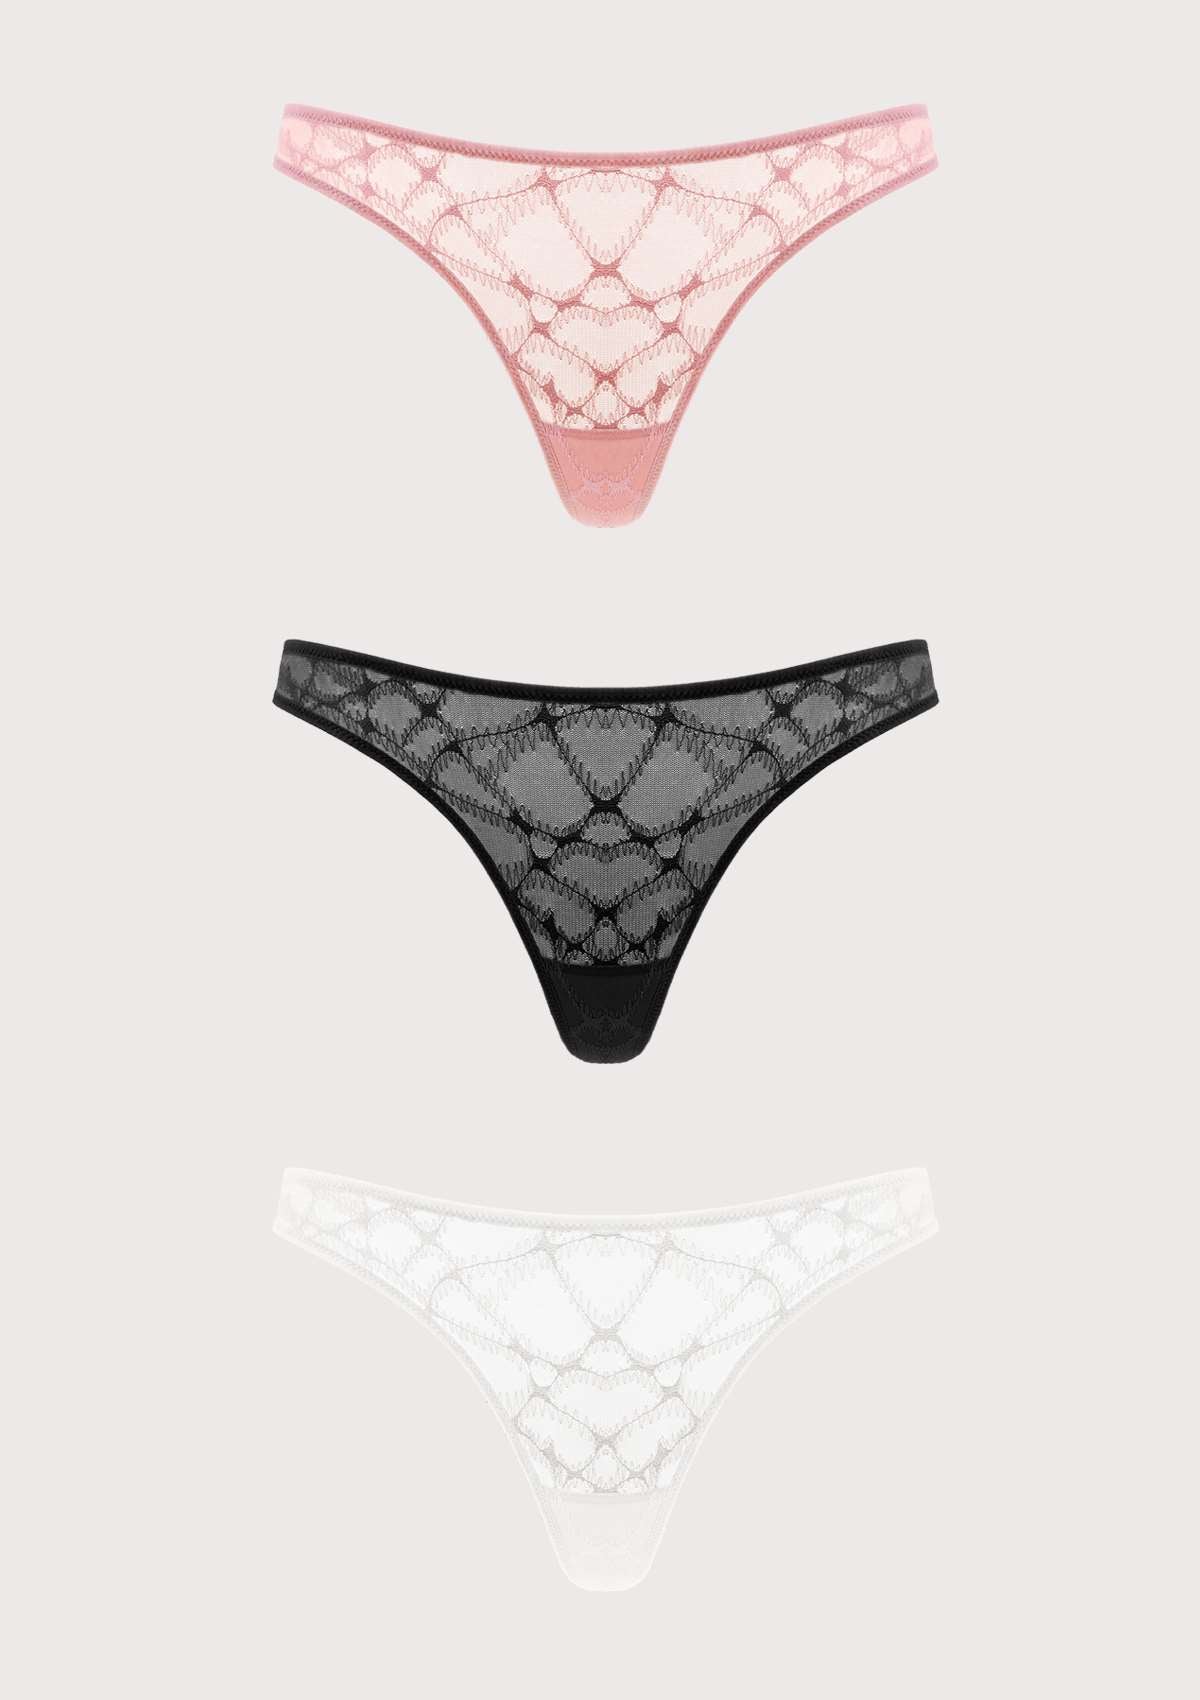 HSIA Soft Sexy Mesh Thong Underwear 3 Pack - M / Black+White+Light Coral